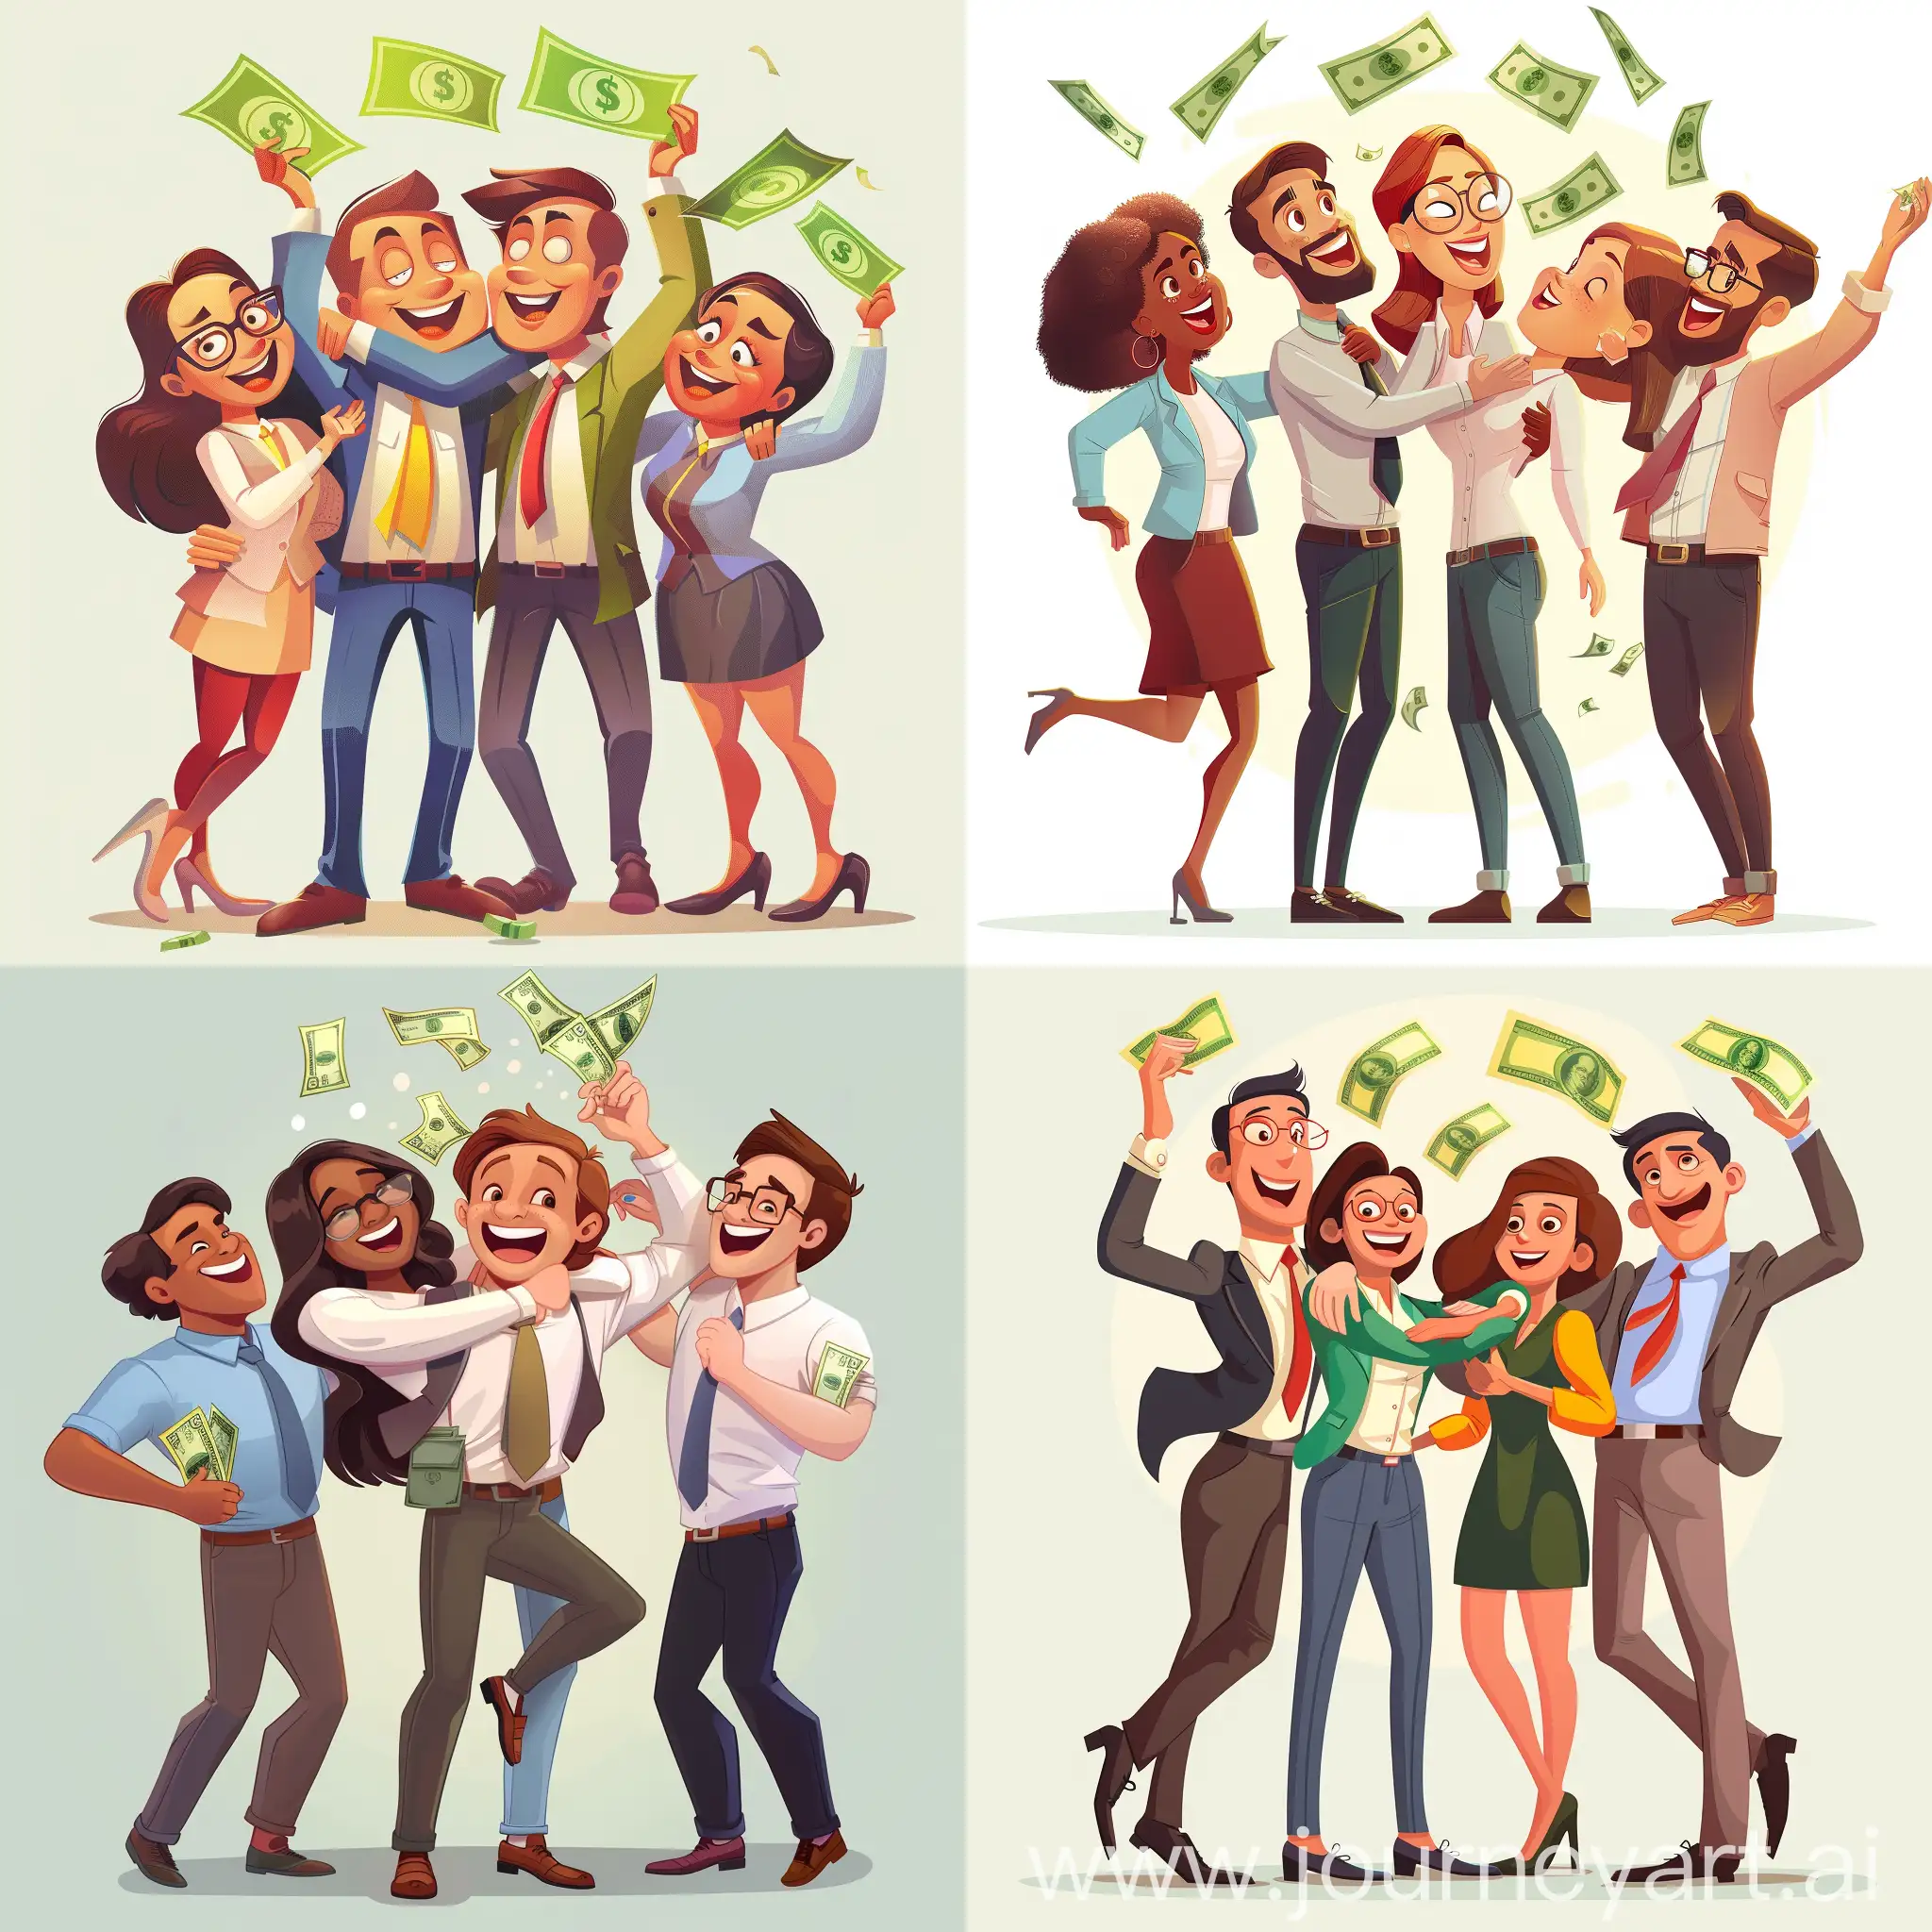 Cheerful-Office-Workers-Celebrating-Success-with-Money-Toss